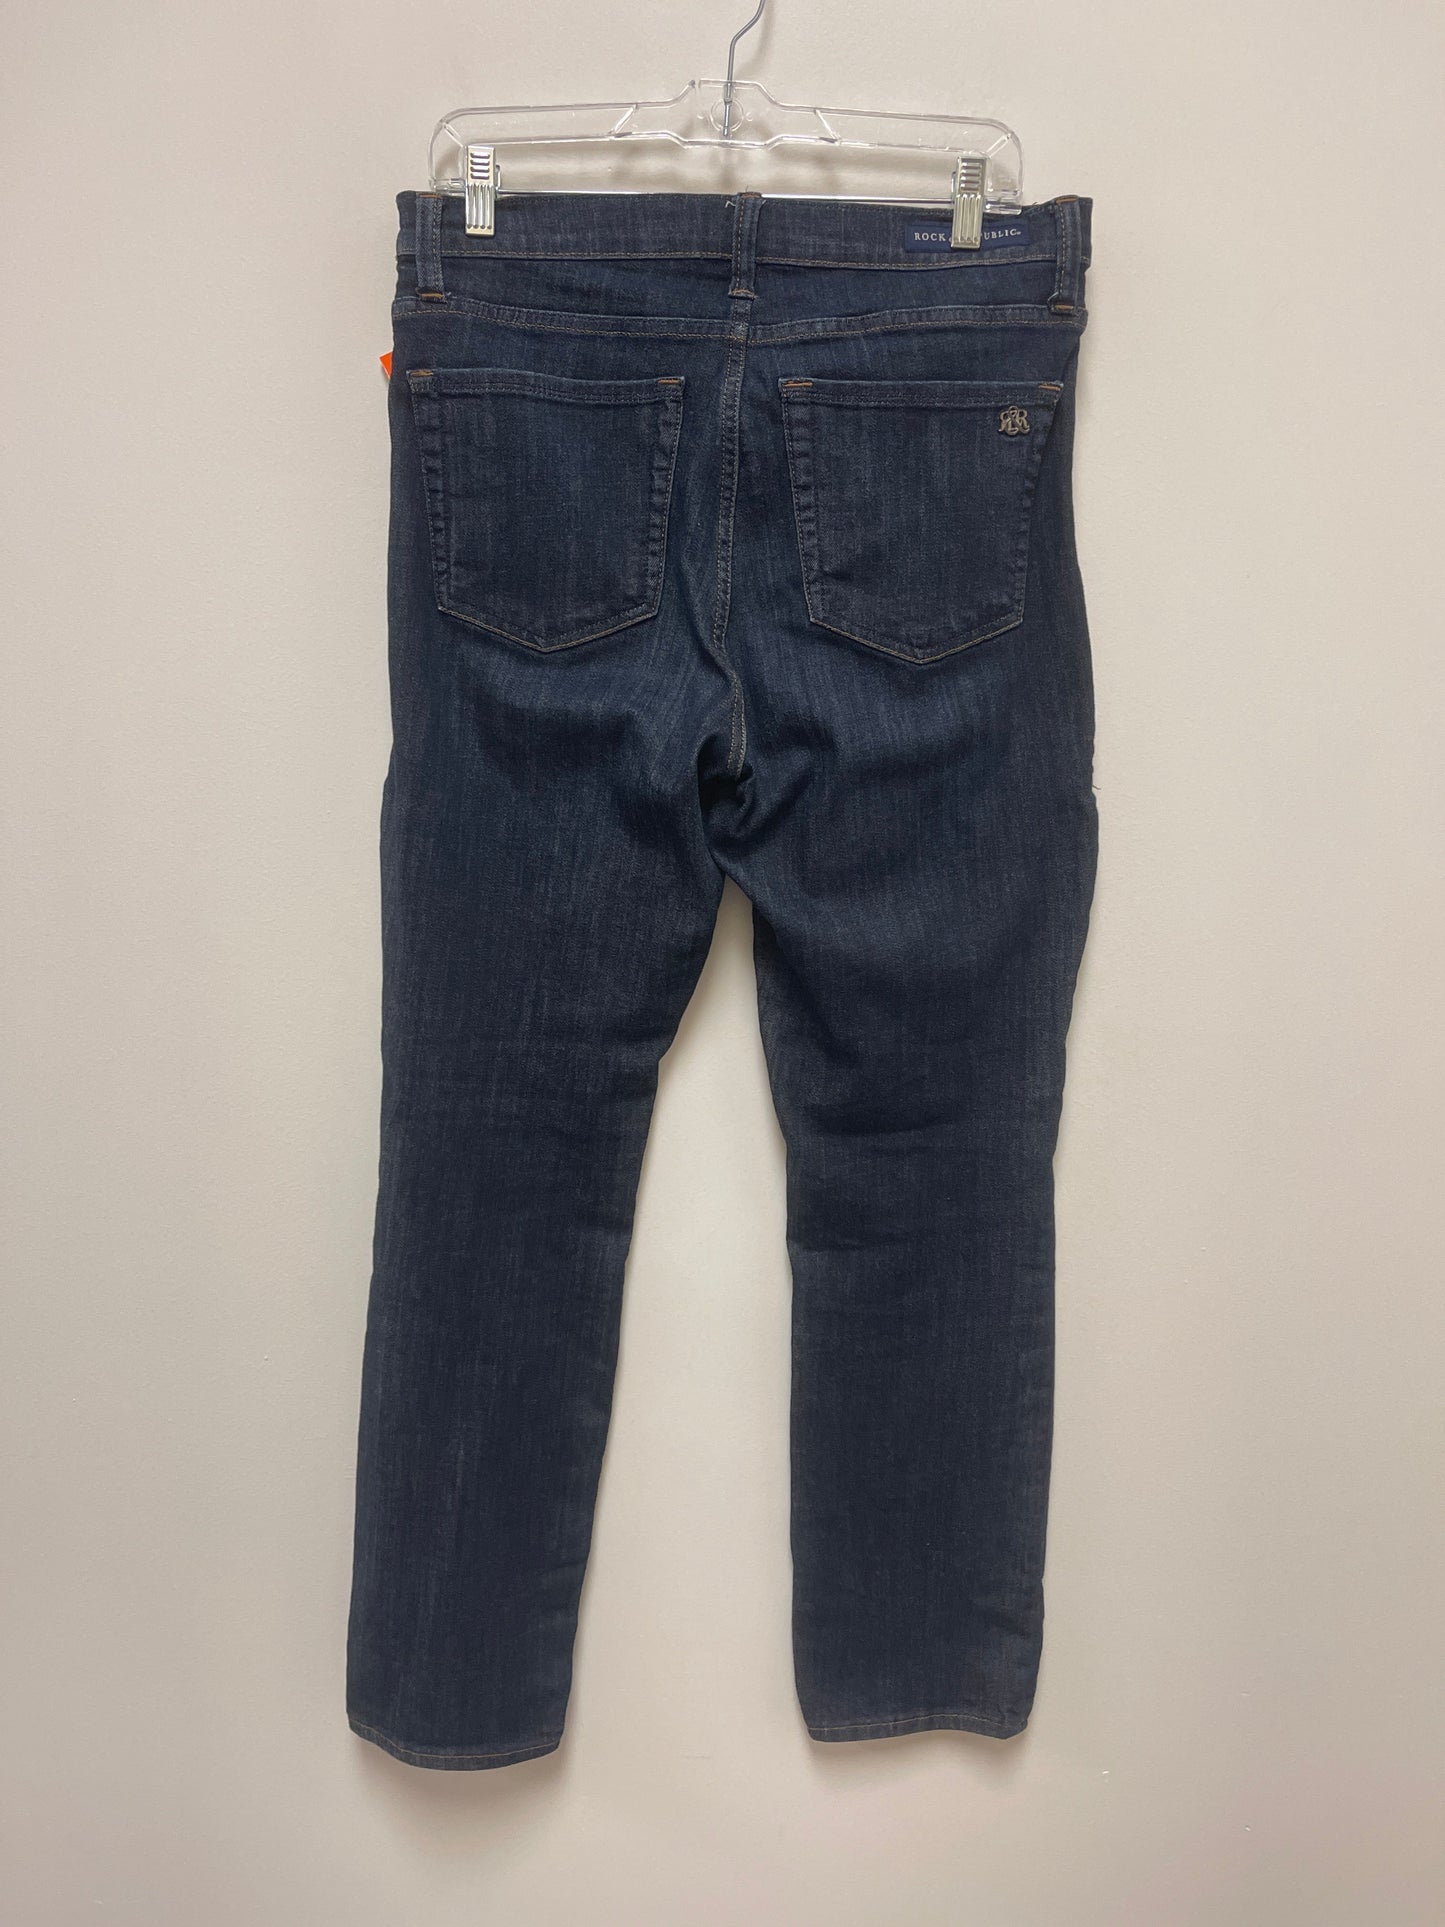 Jeans Skinny By Rock And Republic  Size: 14